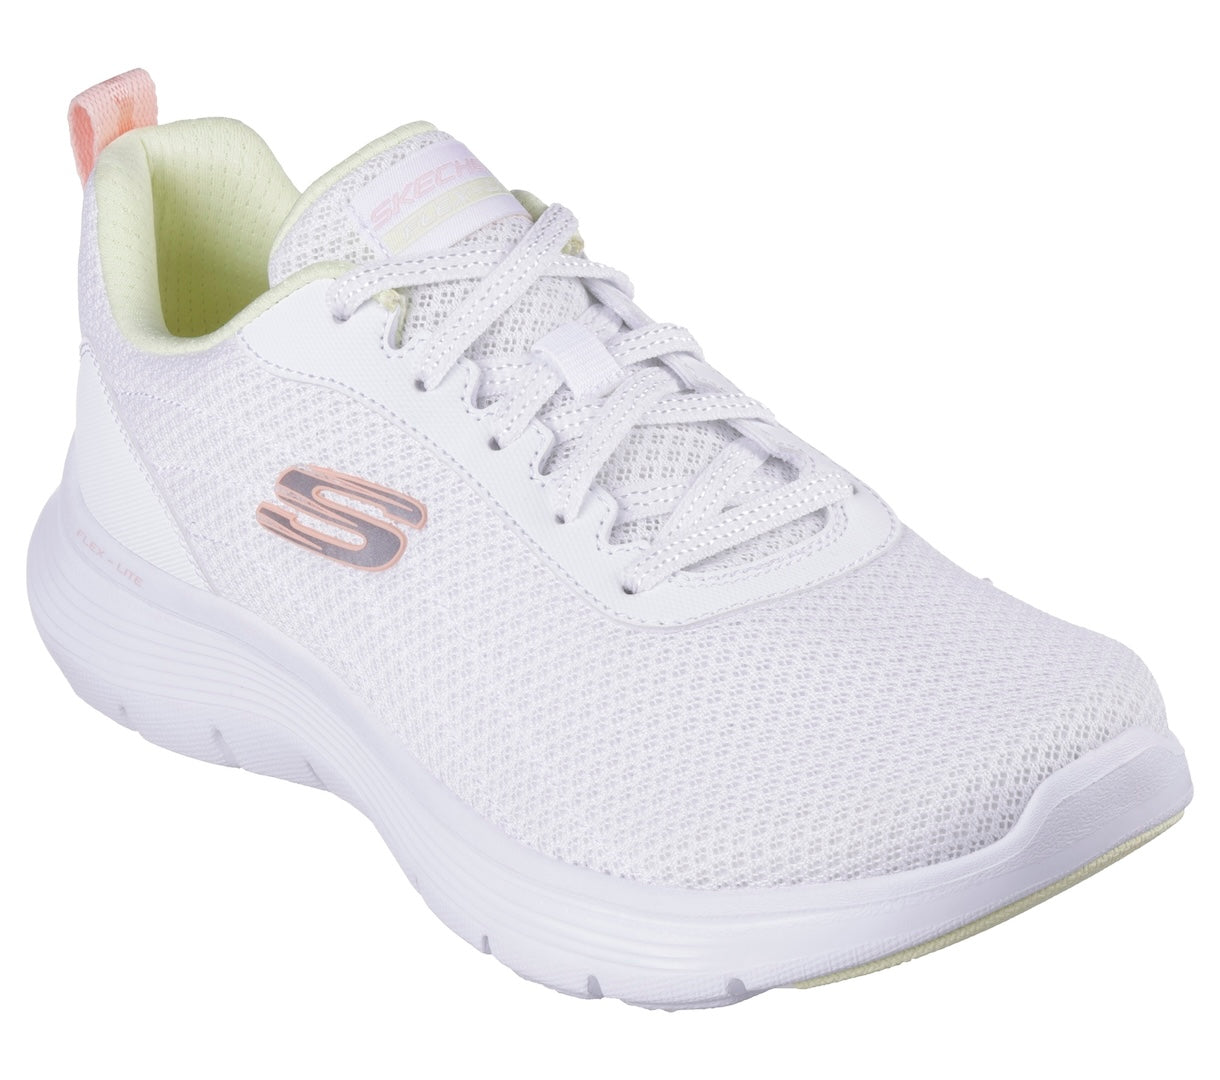 Skechers 150200 Flex Appeal 5.0-New Thrive Ladies White Multi Textile Vegan Lace Up Trainers